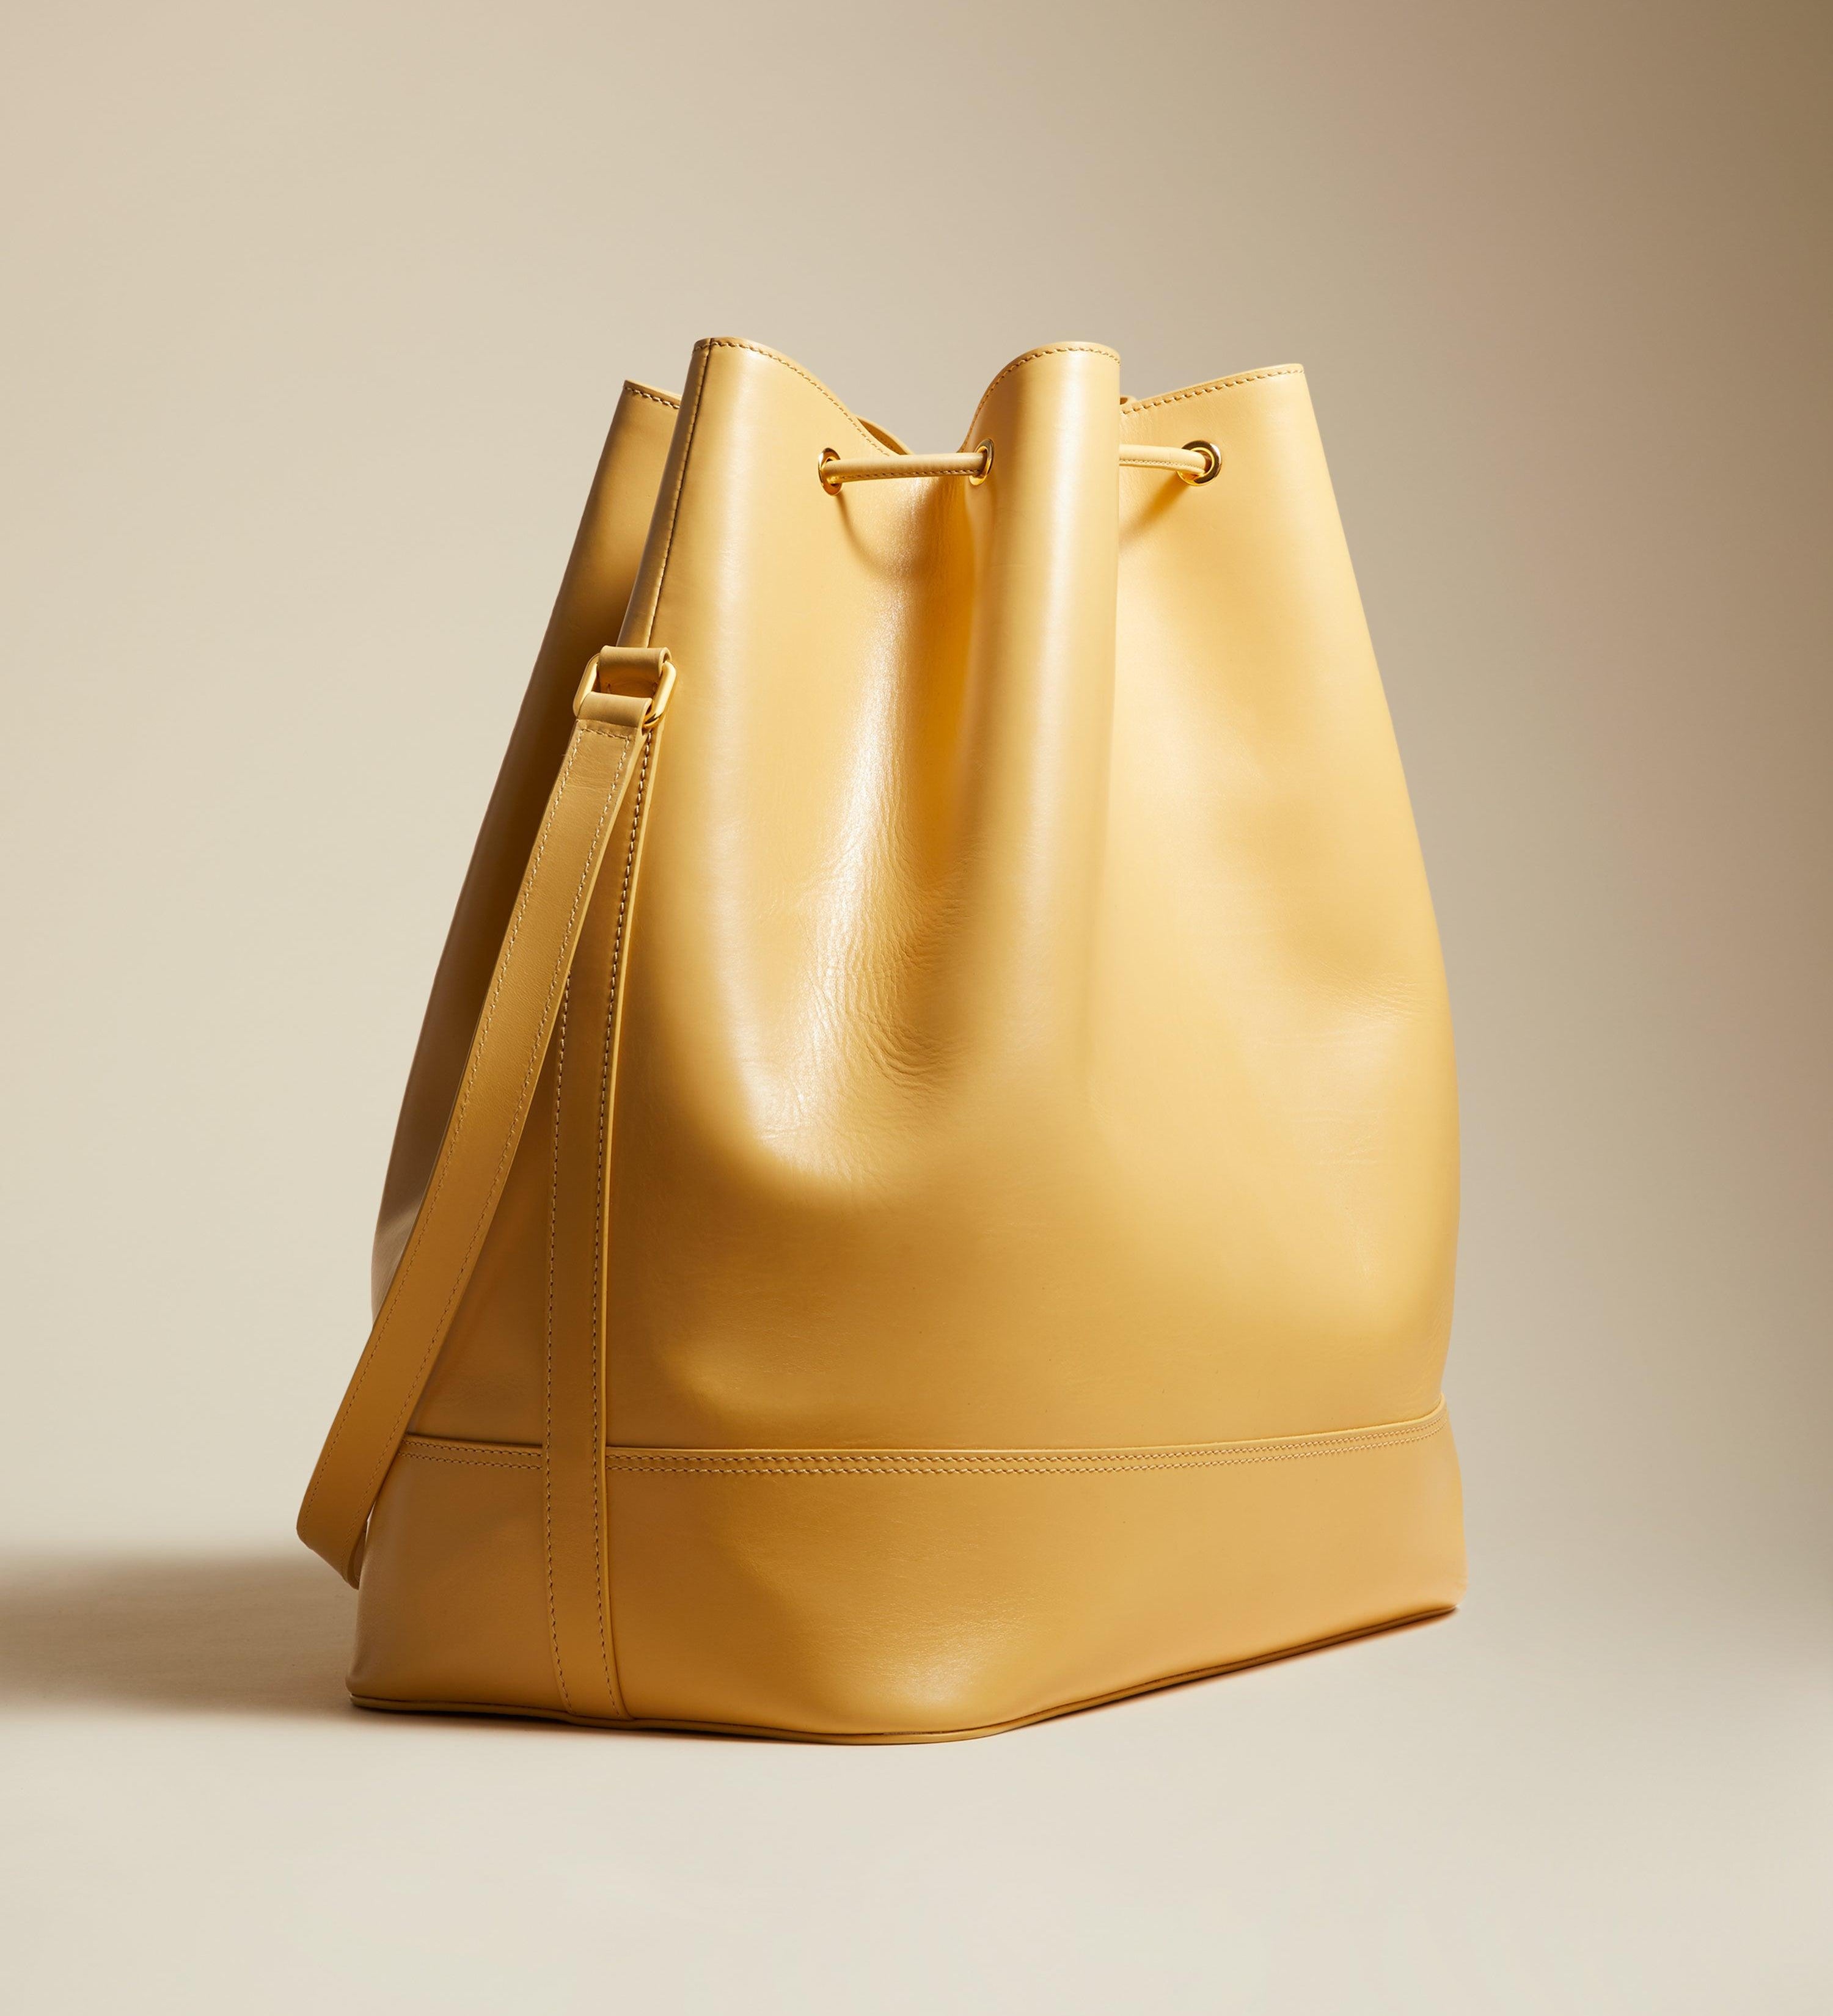 The Large Cecilia Bag in Butter Leather - The Iconic Issue